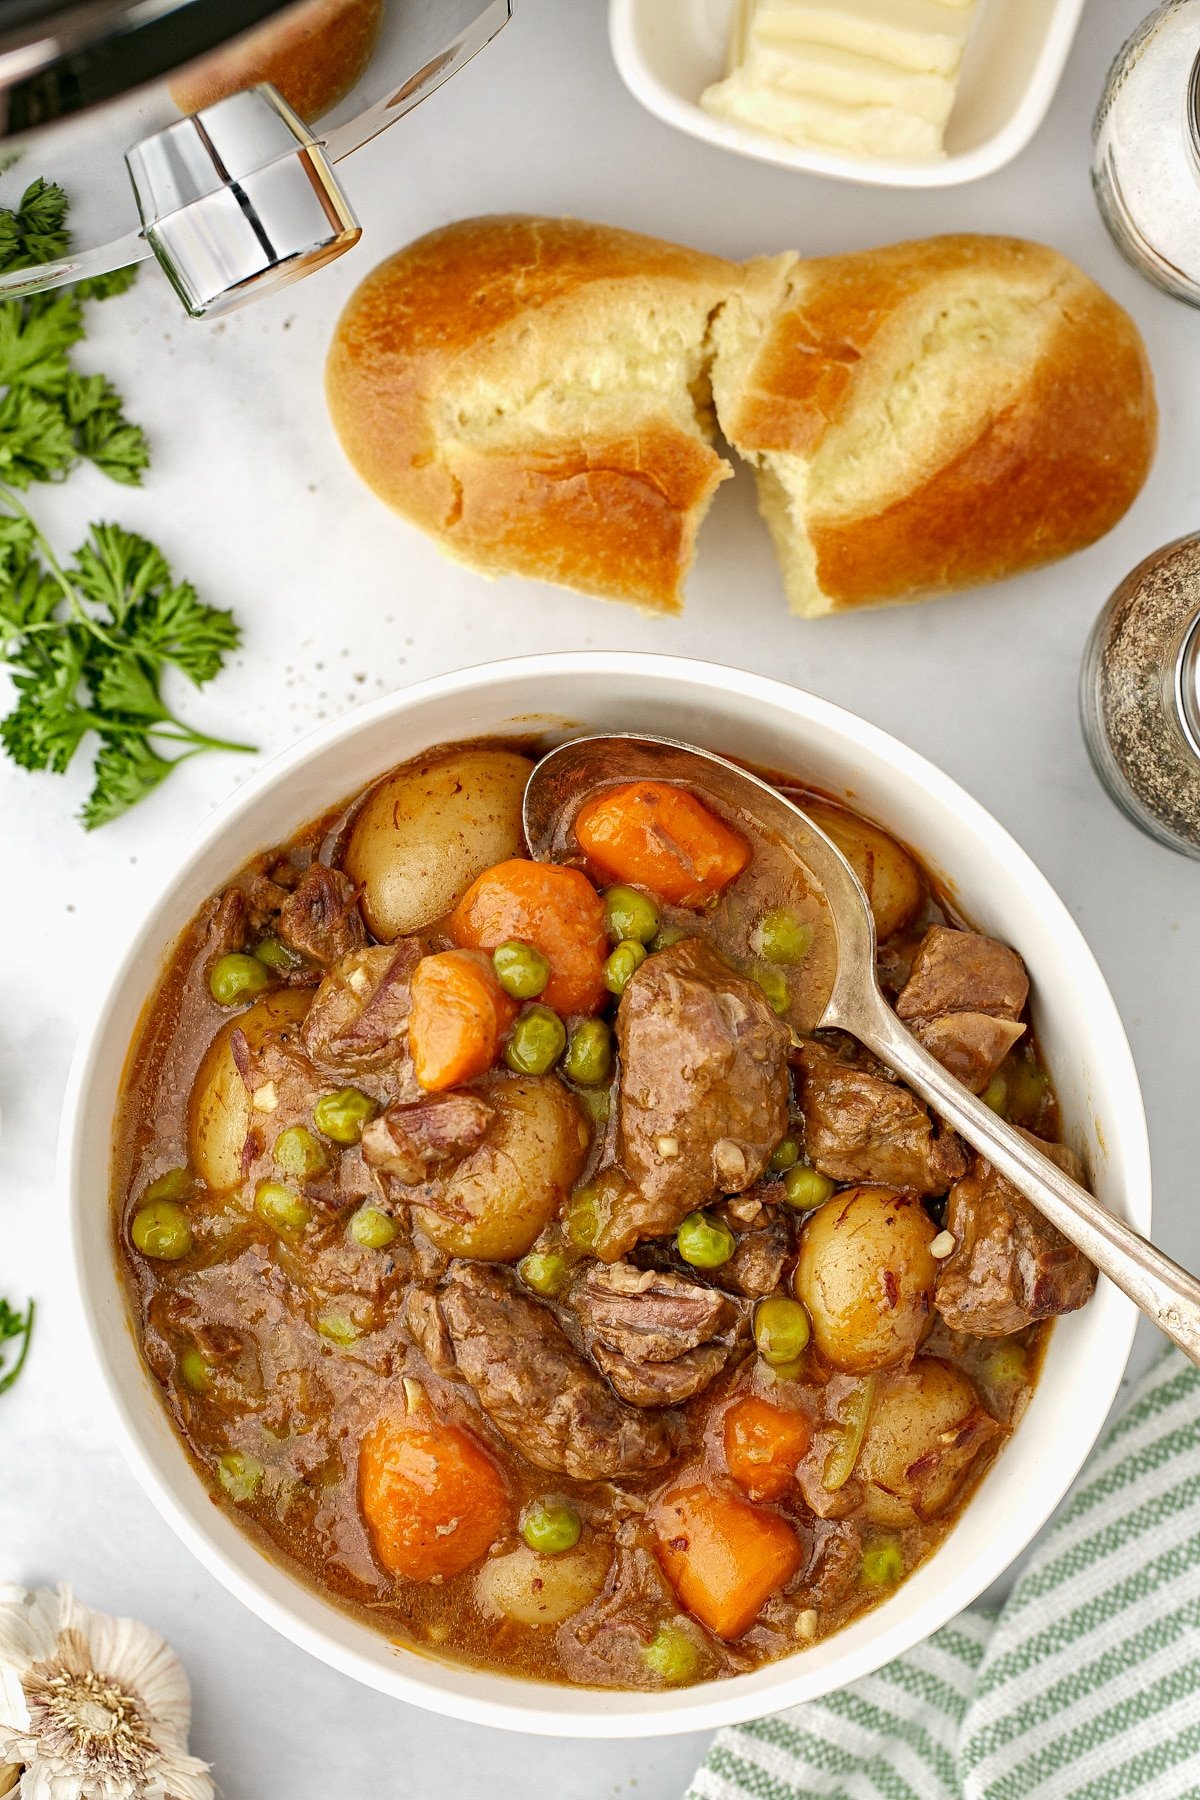 A bowl of beef stew with a small baguette on the side.